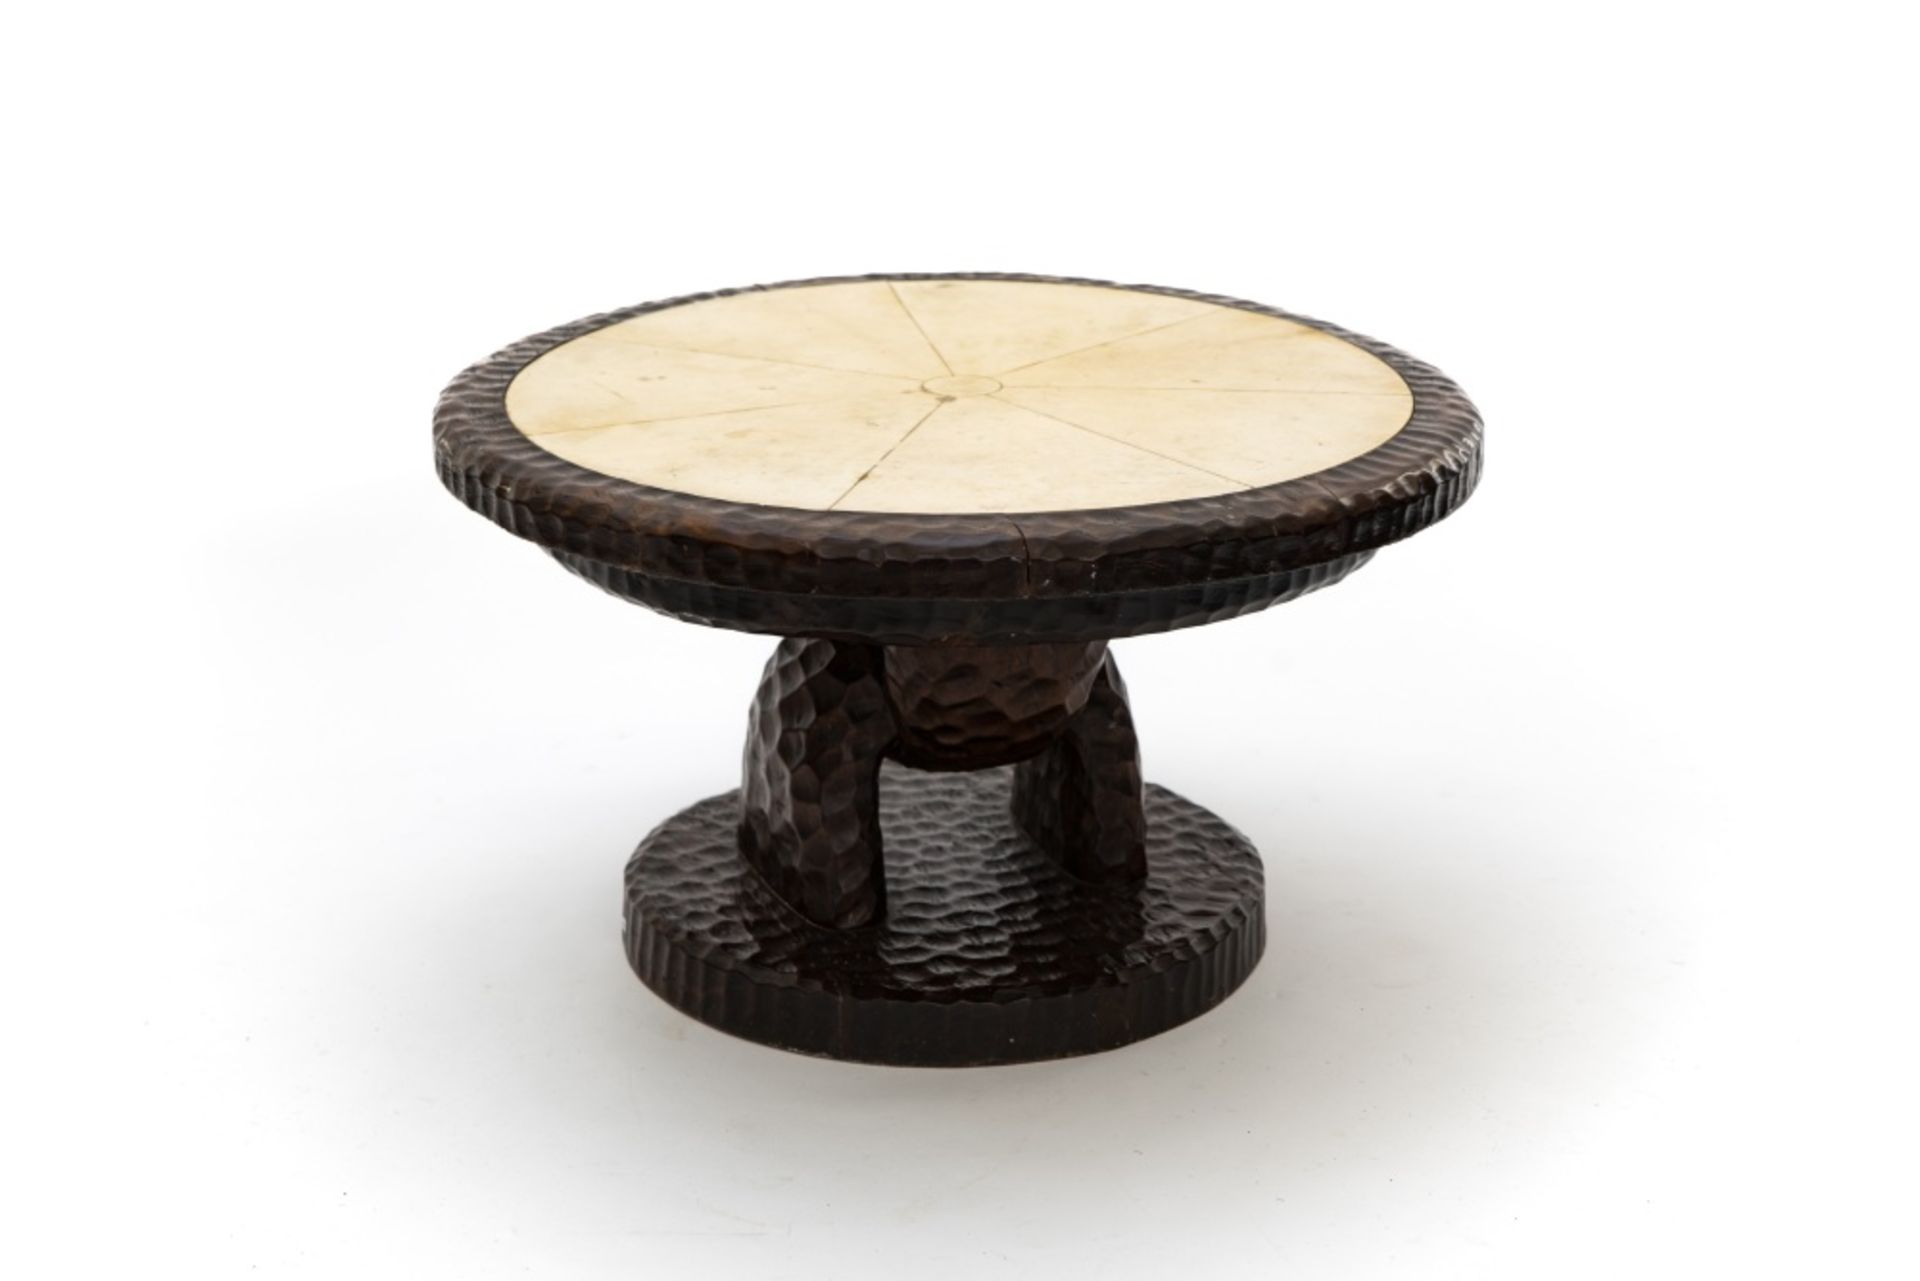 Art Deco style work Side table, Circular, made of chiselled oakwood, surface upholstered in - Image 2 of 3